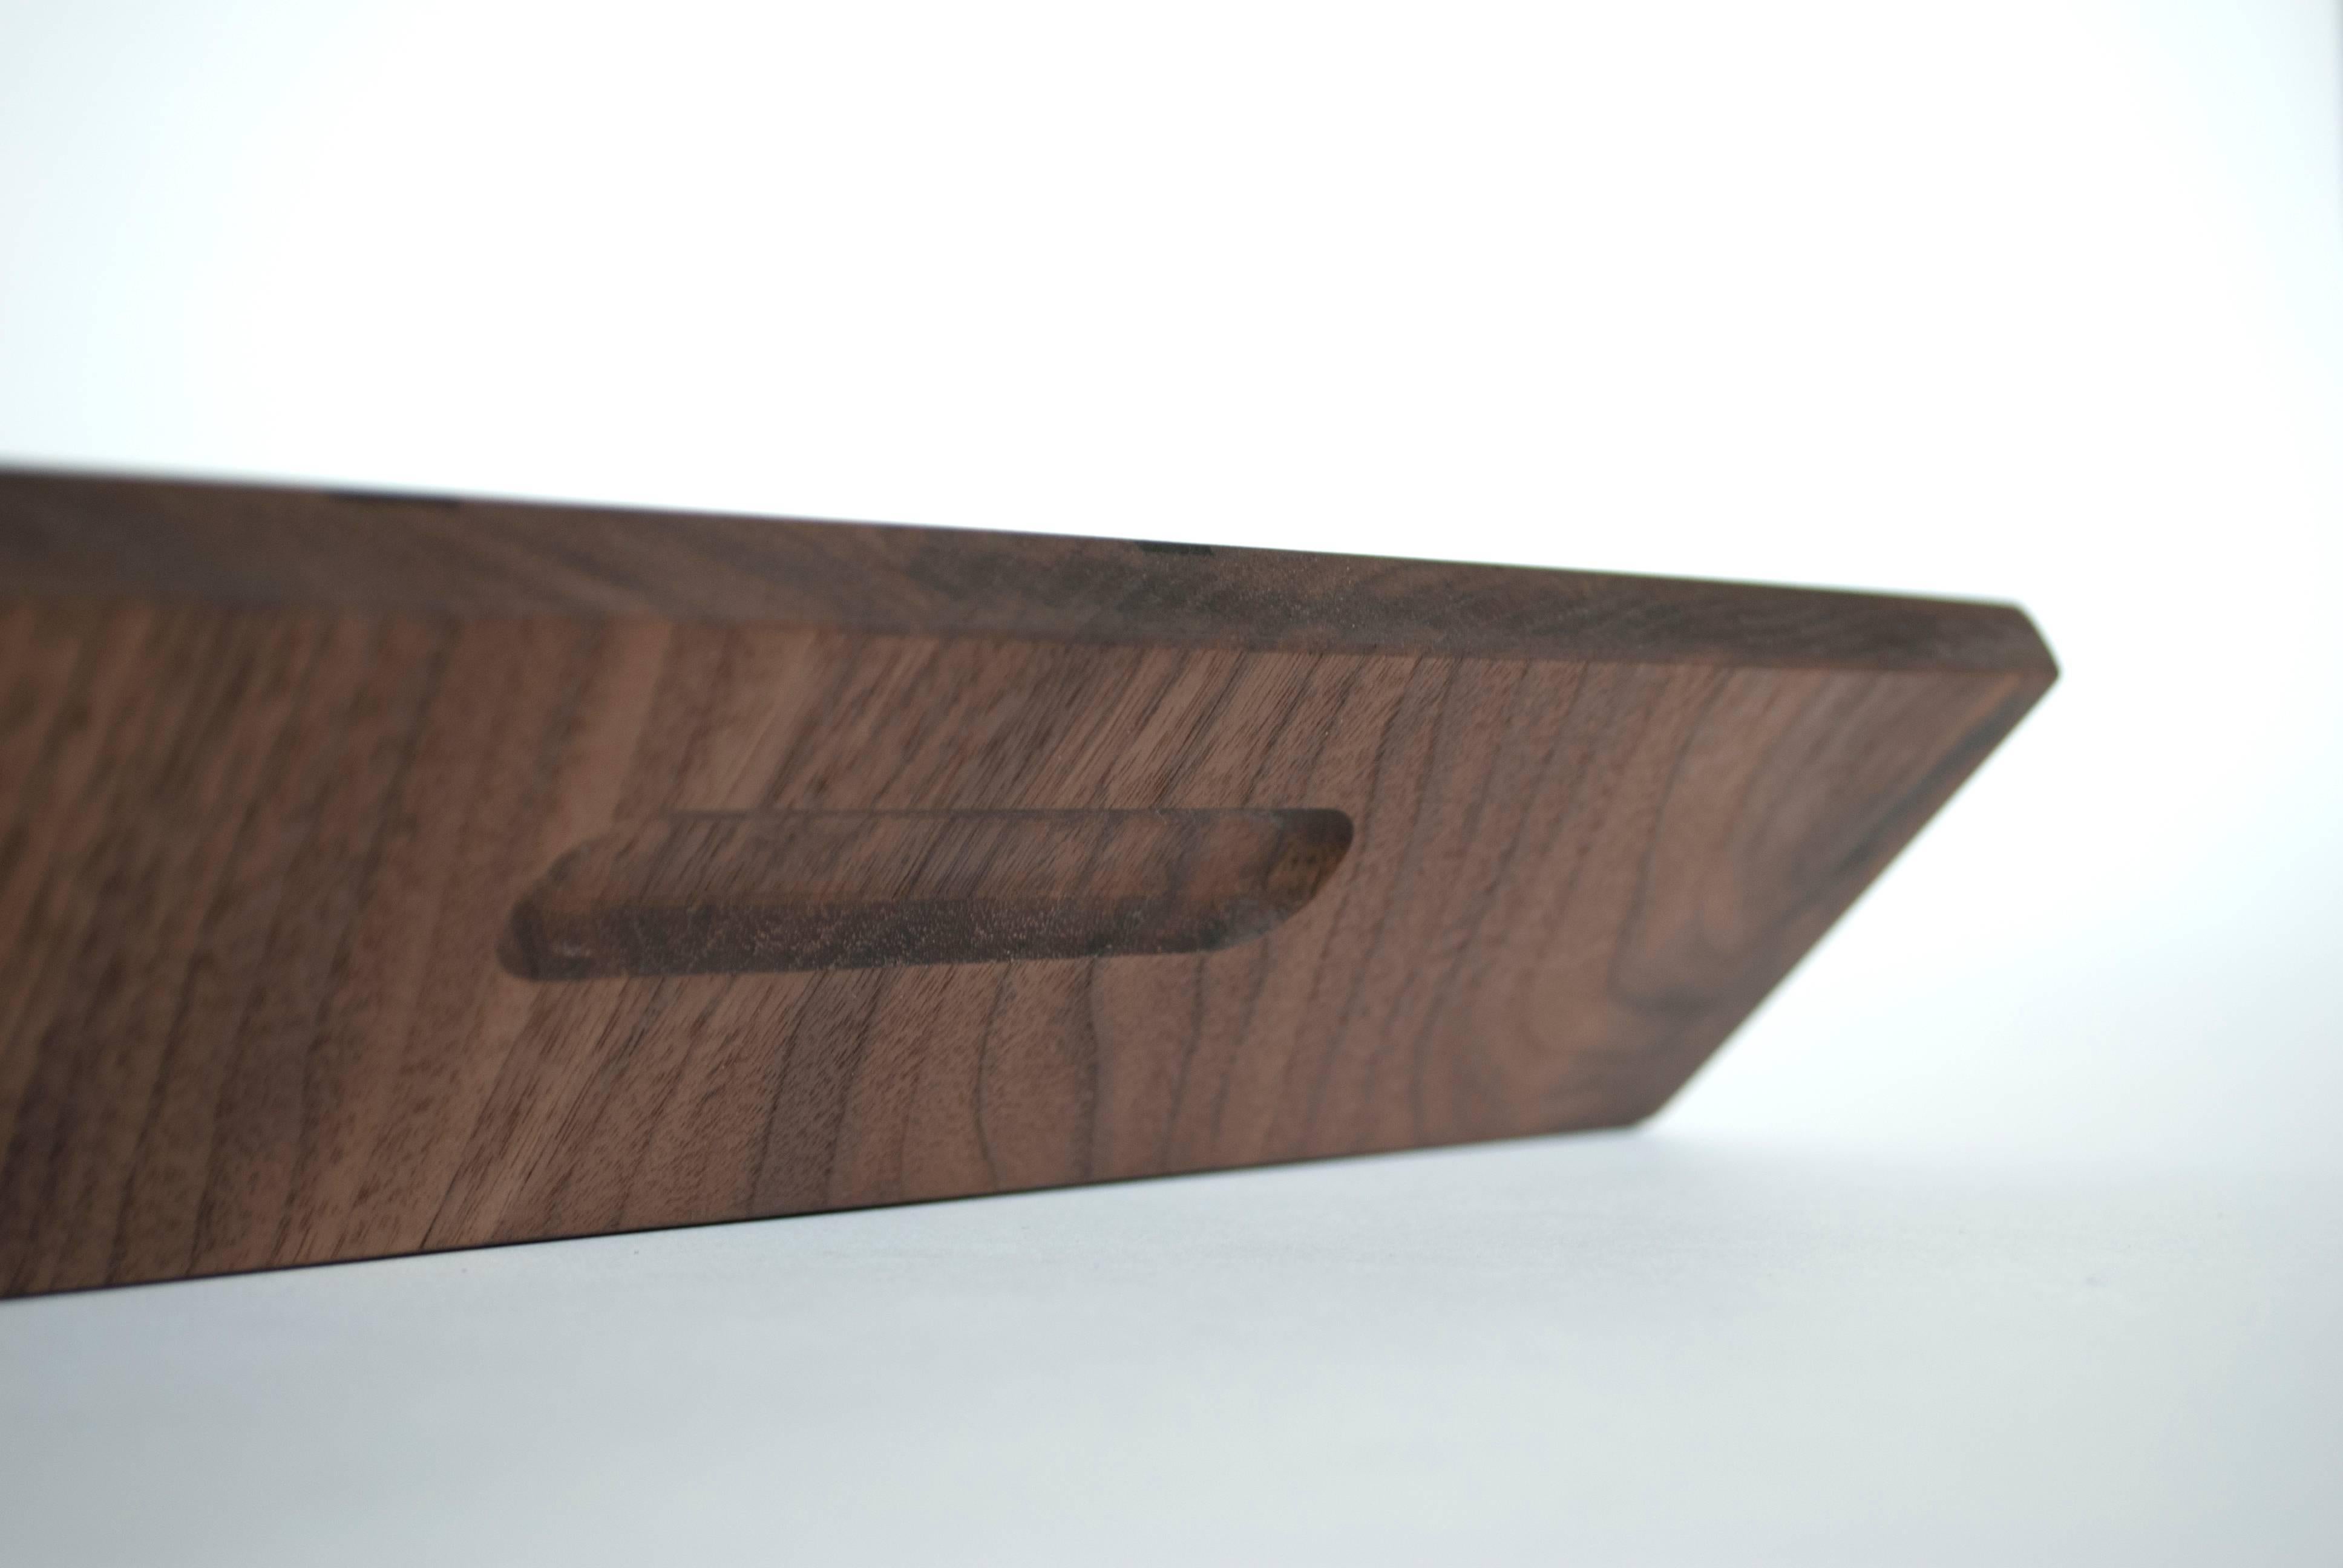 American Honeycomb Decorative Serving Tray in Walnut with Inlaid Resin - In Stock